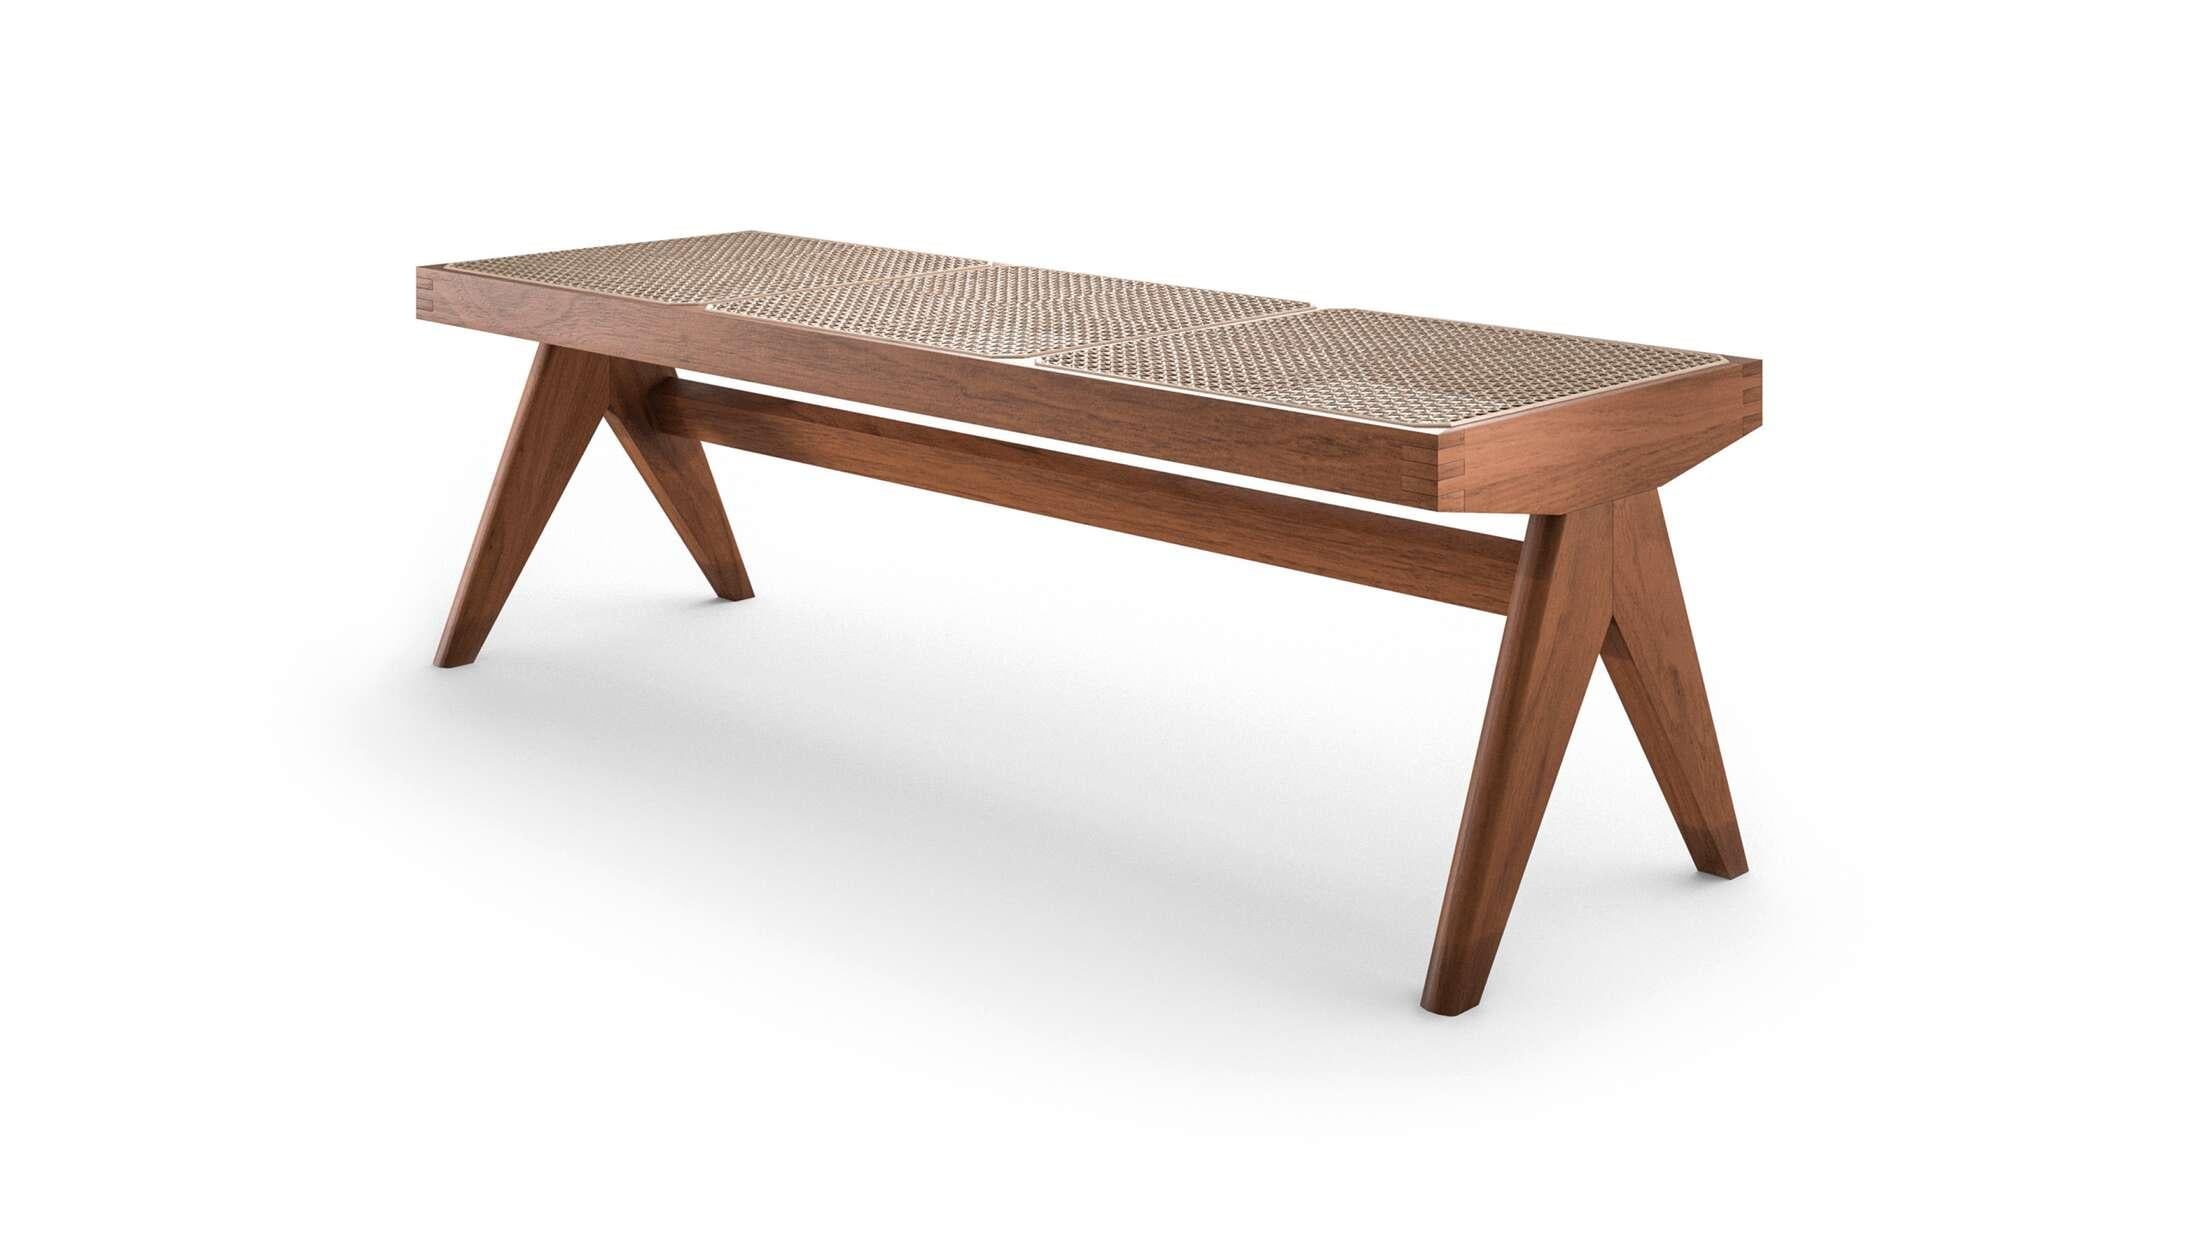 Civil bench 057 by Pierre Jeanneret for Cassina. Prices vary dependent on the chosen material. Available in teak, oak or black stained oak. 

Assembly, consists of three consecutive seat elements supported by a single frontal crossbar and two side